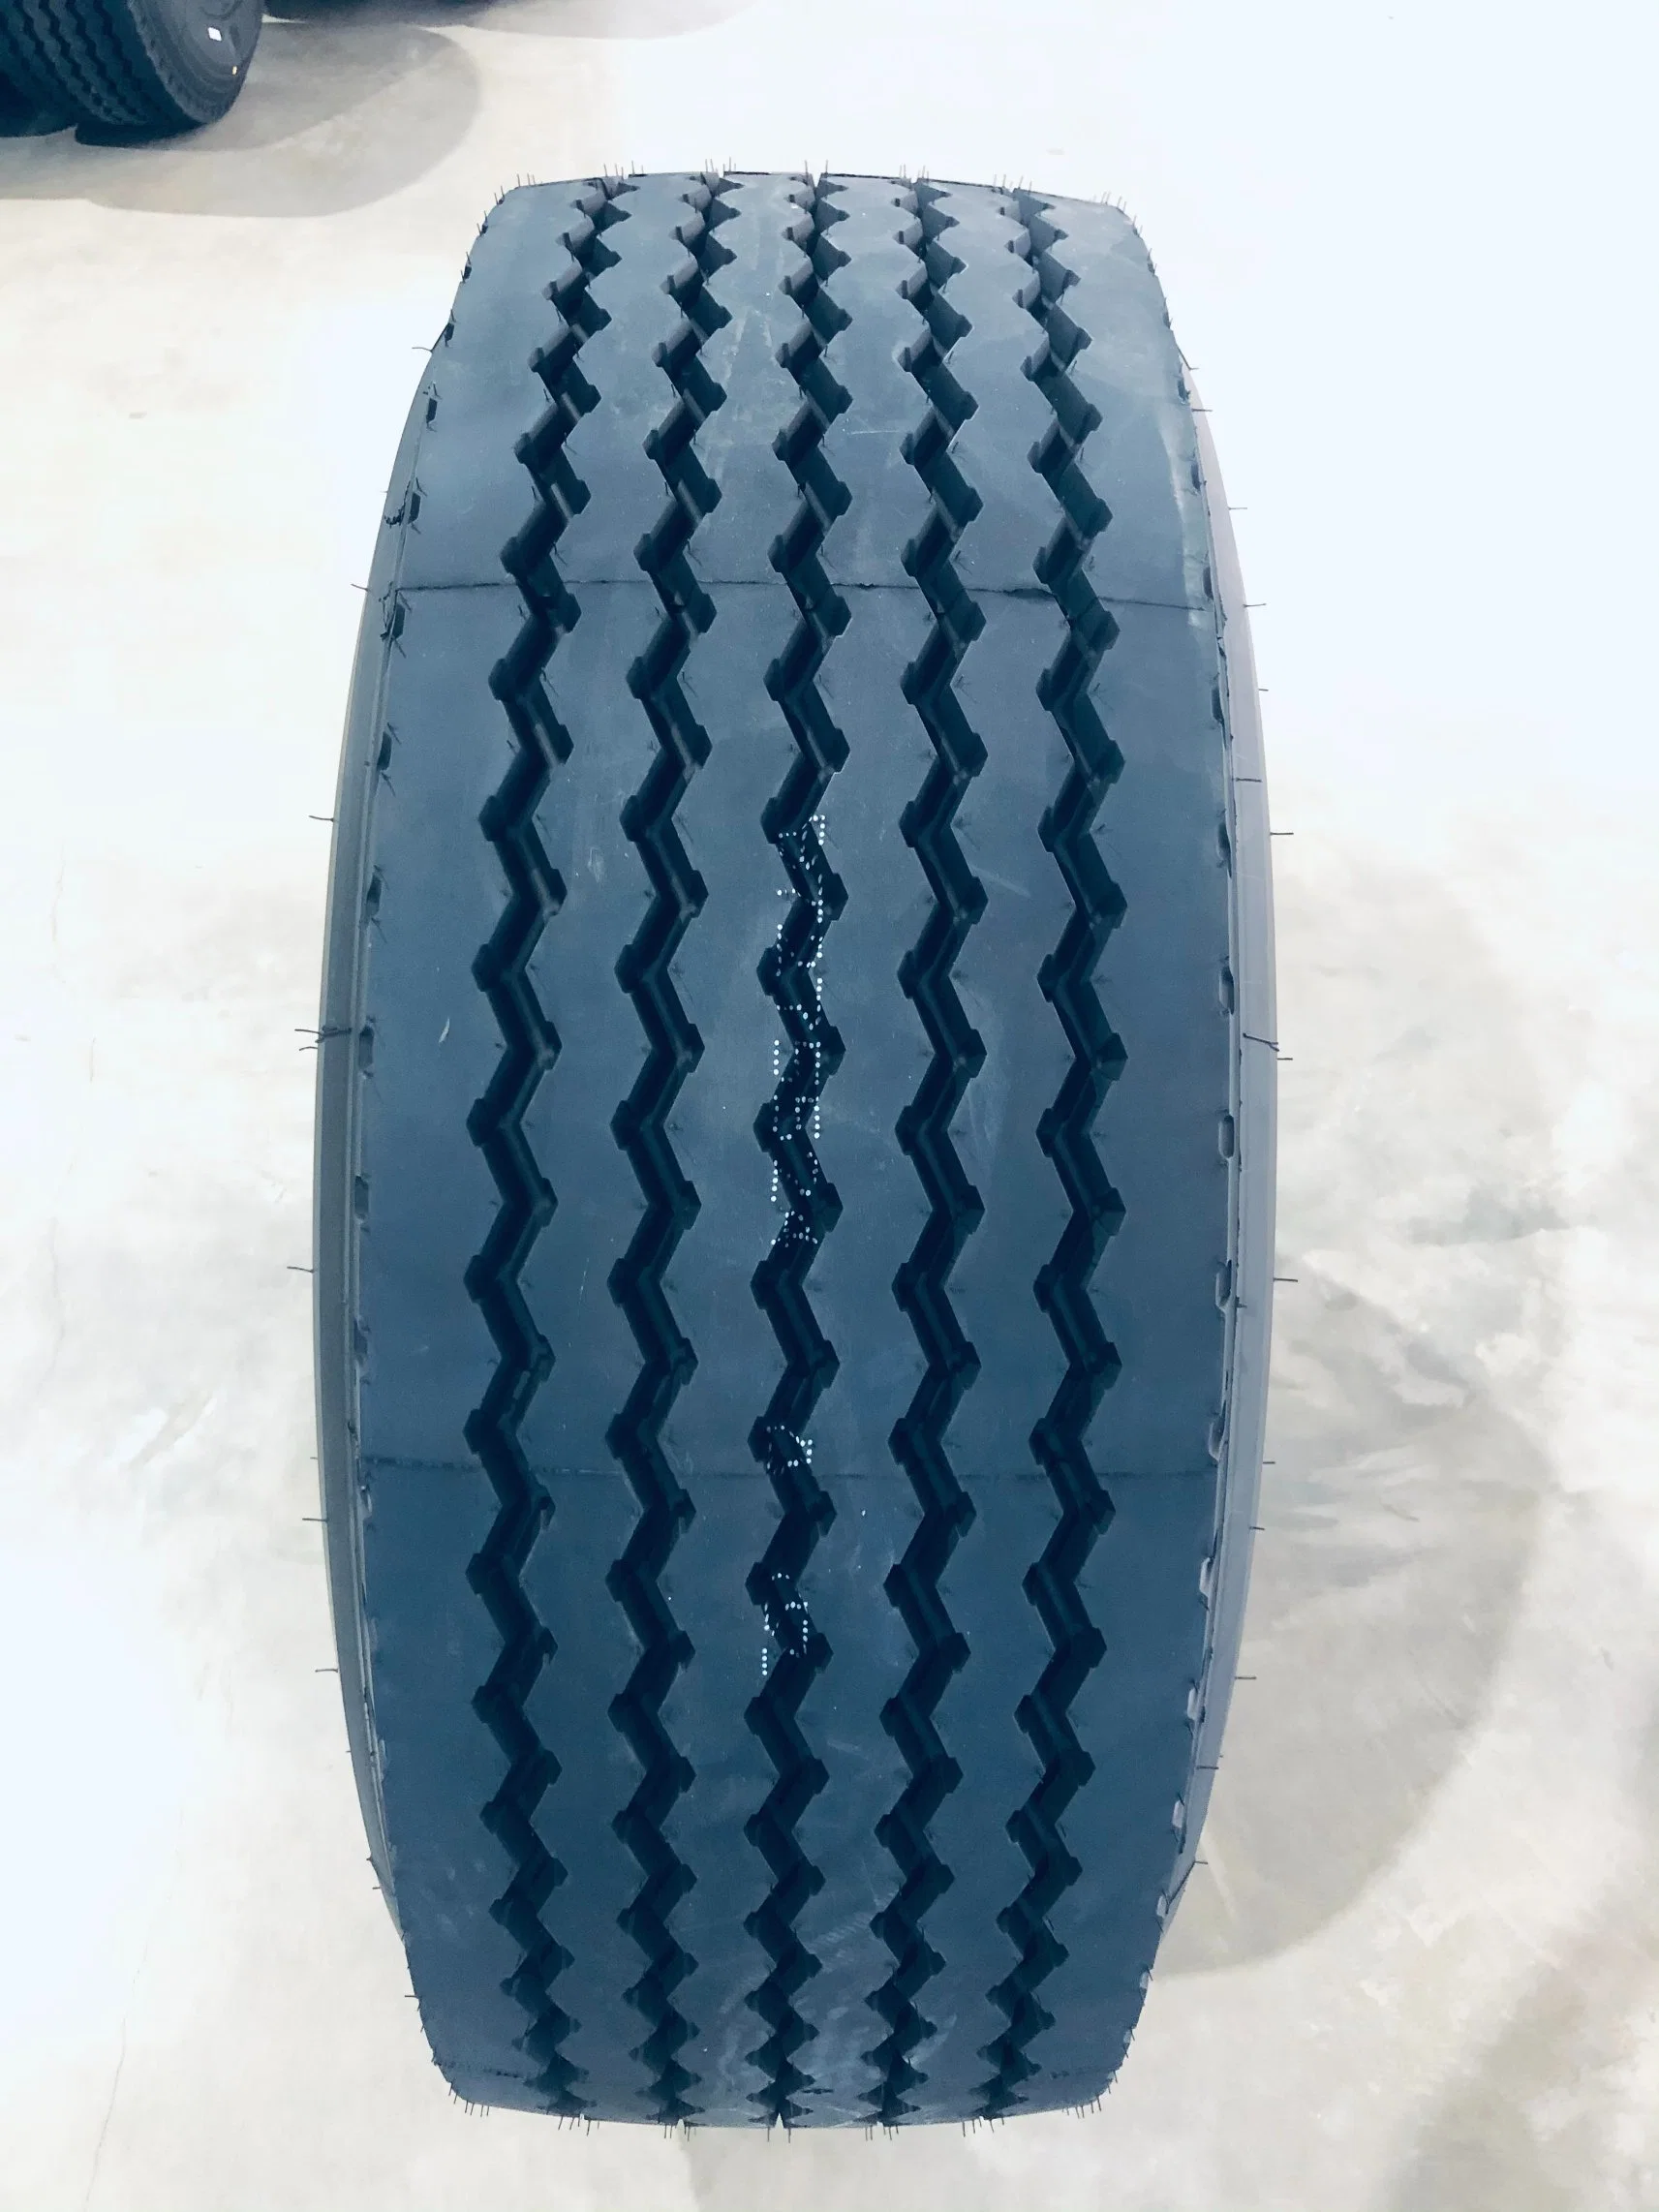 Factory production rubber wheel natural tyre truck car tyres Inner tube